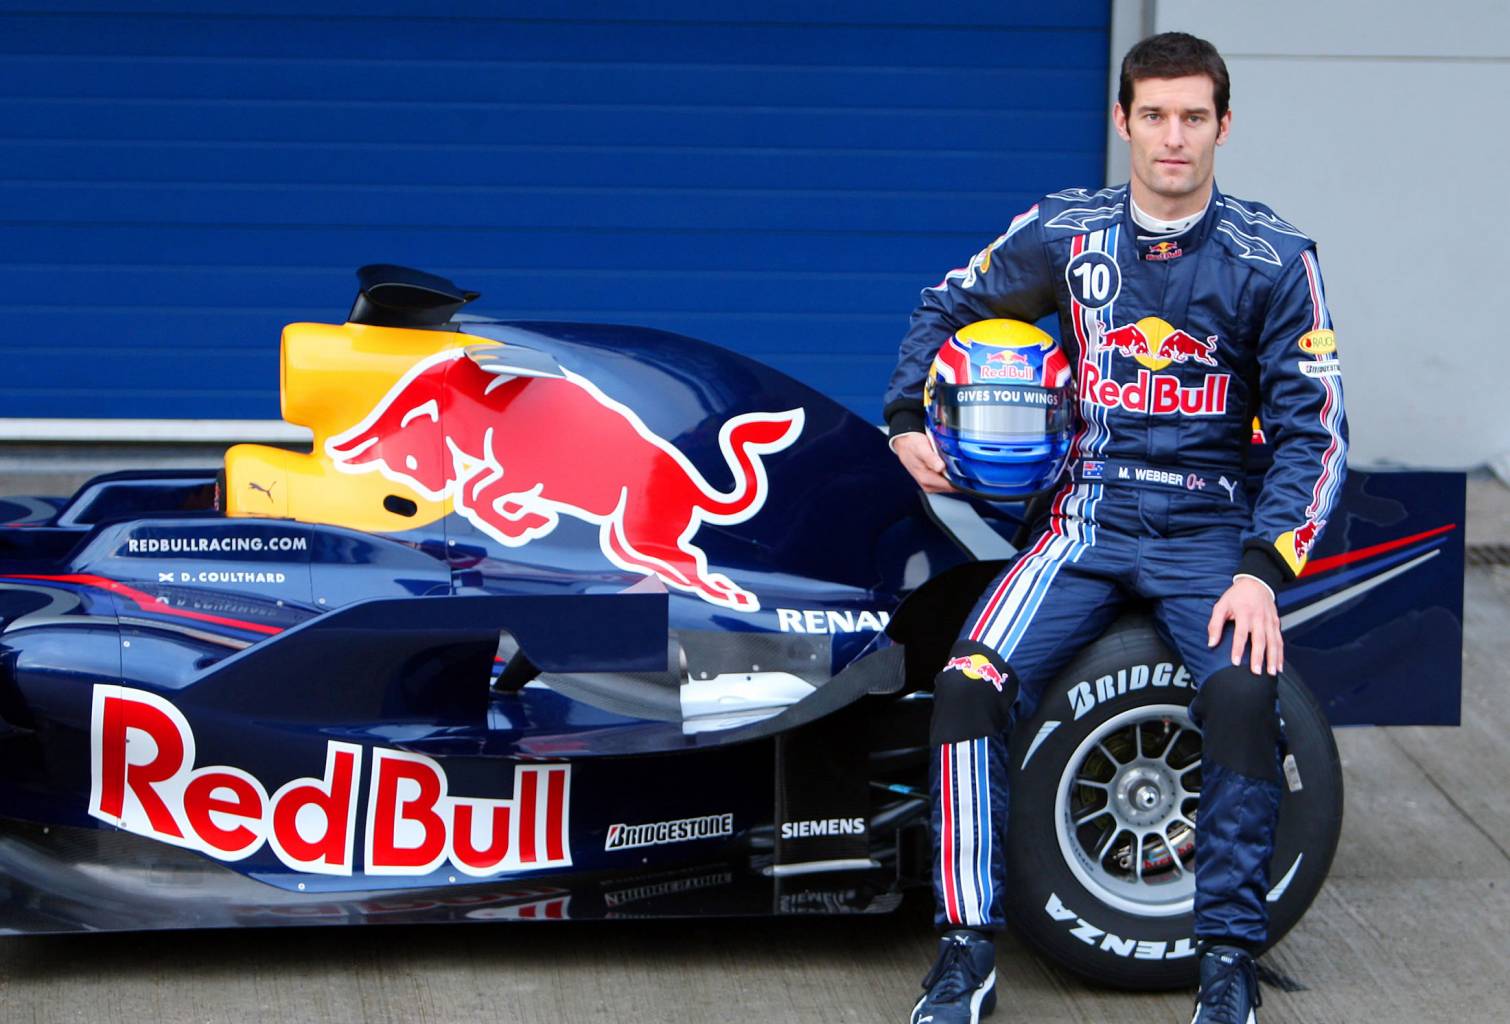 more-pictures-of-the-red-bull-rb4-_34d6b.jpg